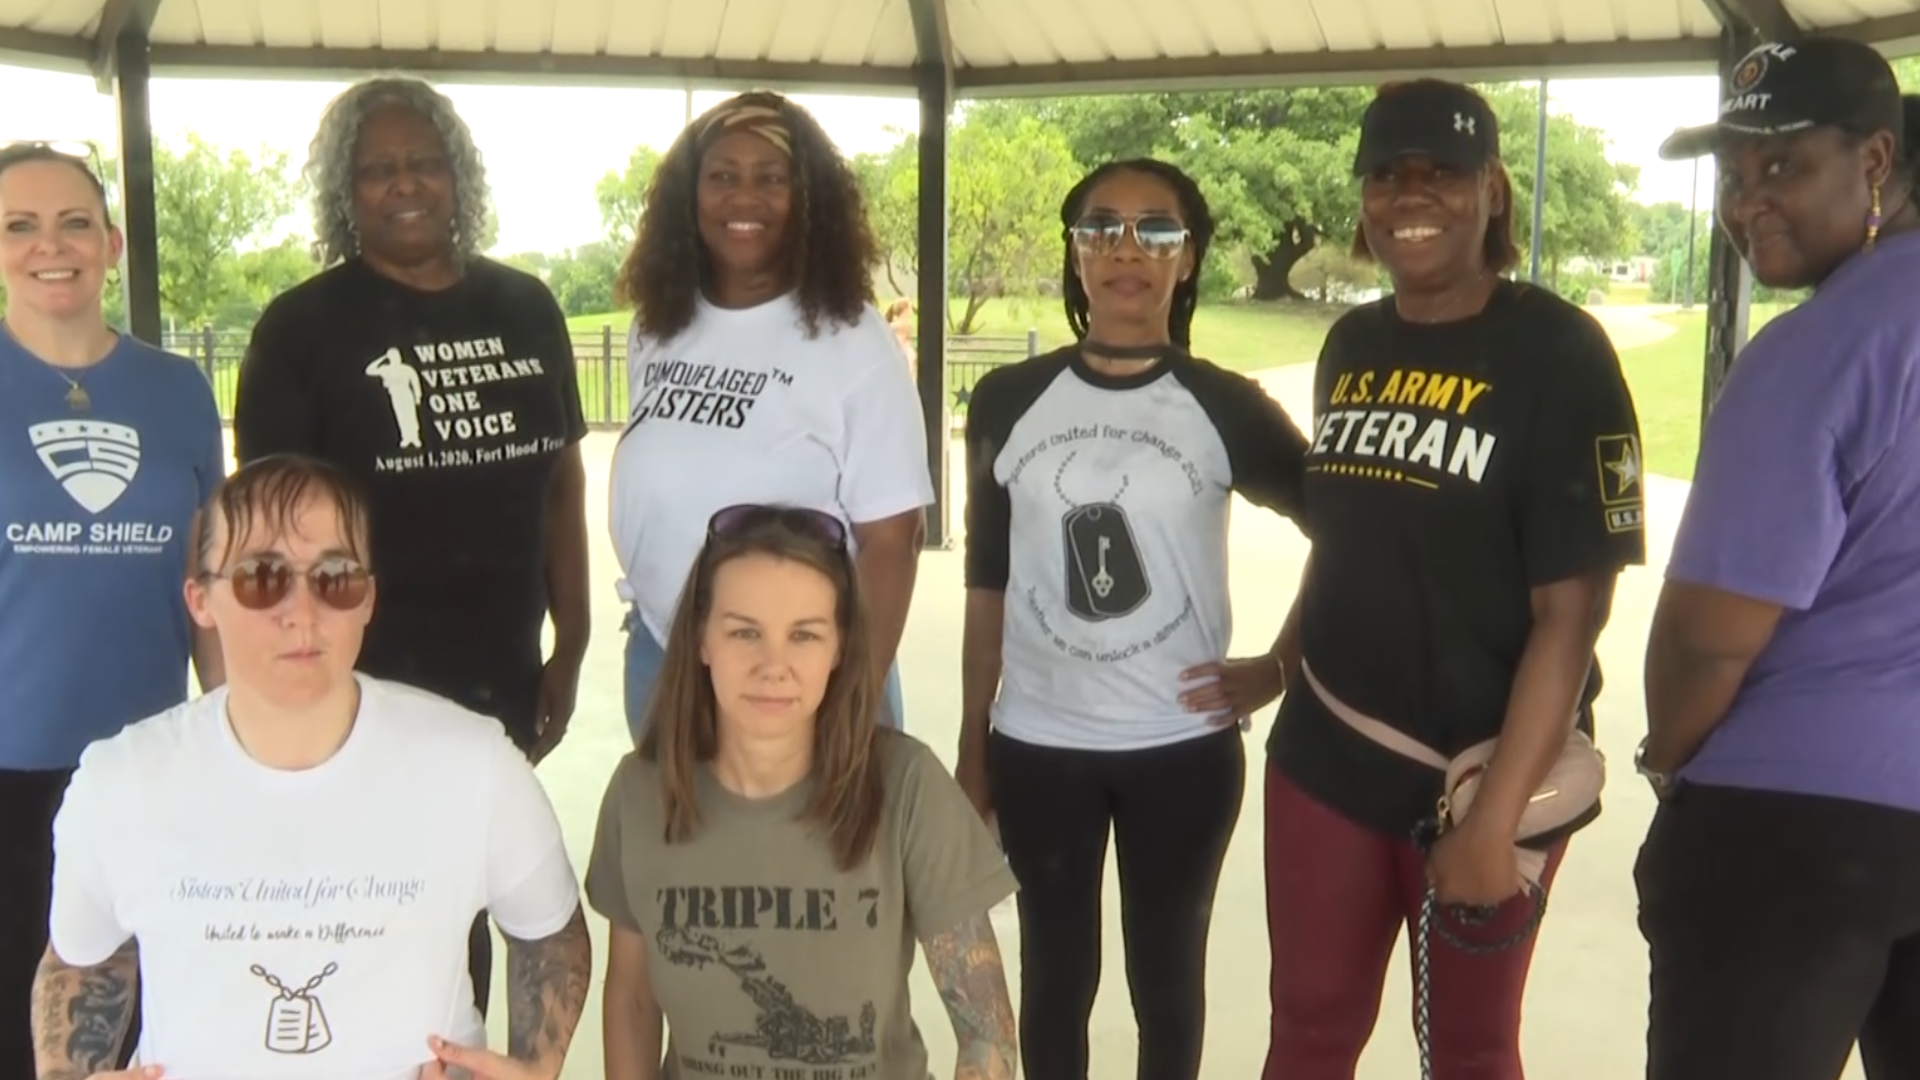 Women veterans in Killeen say they want to be treated like their male counterparts who they fought with.